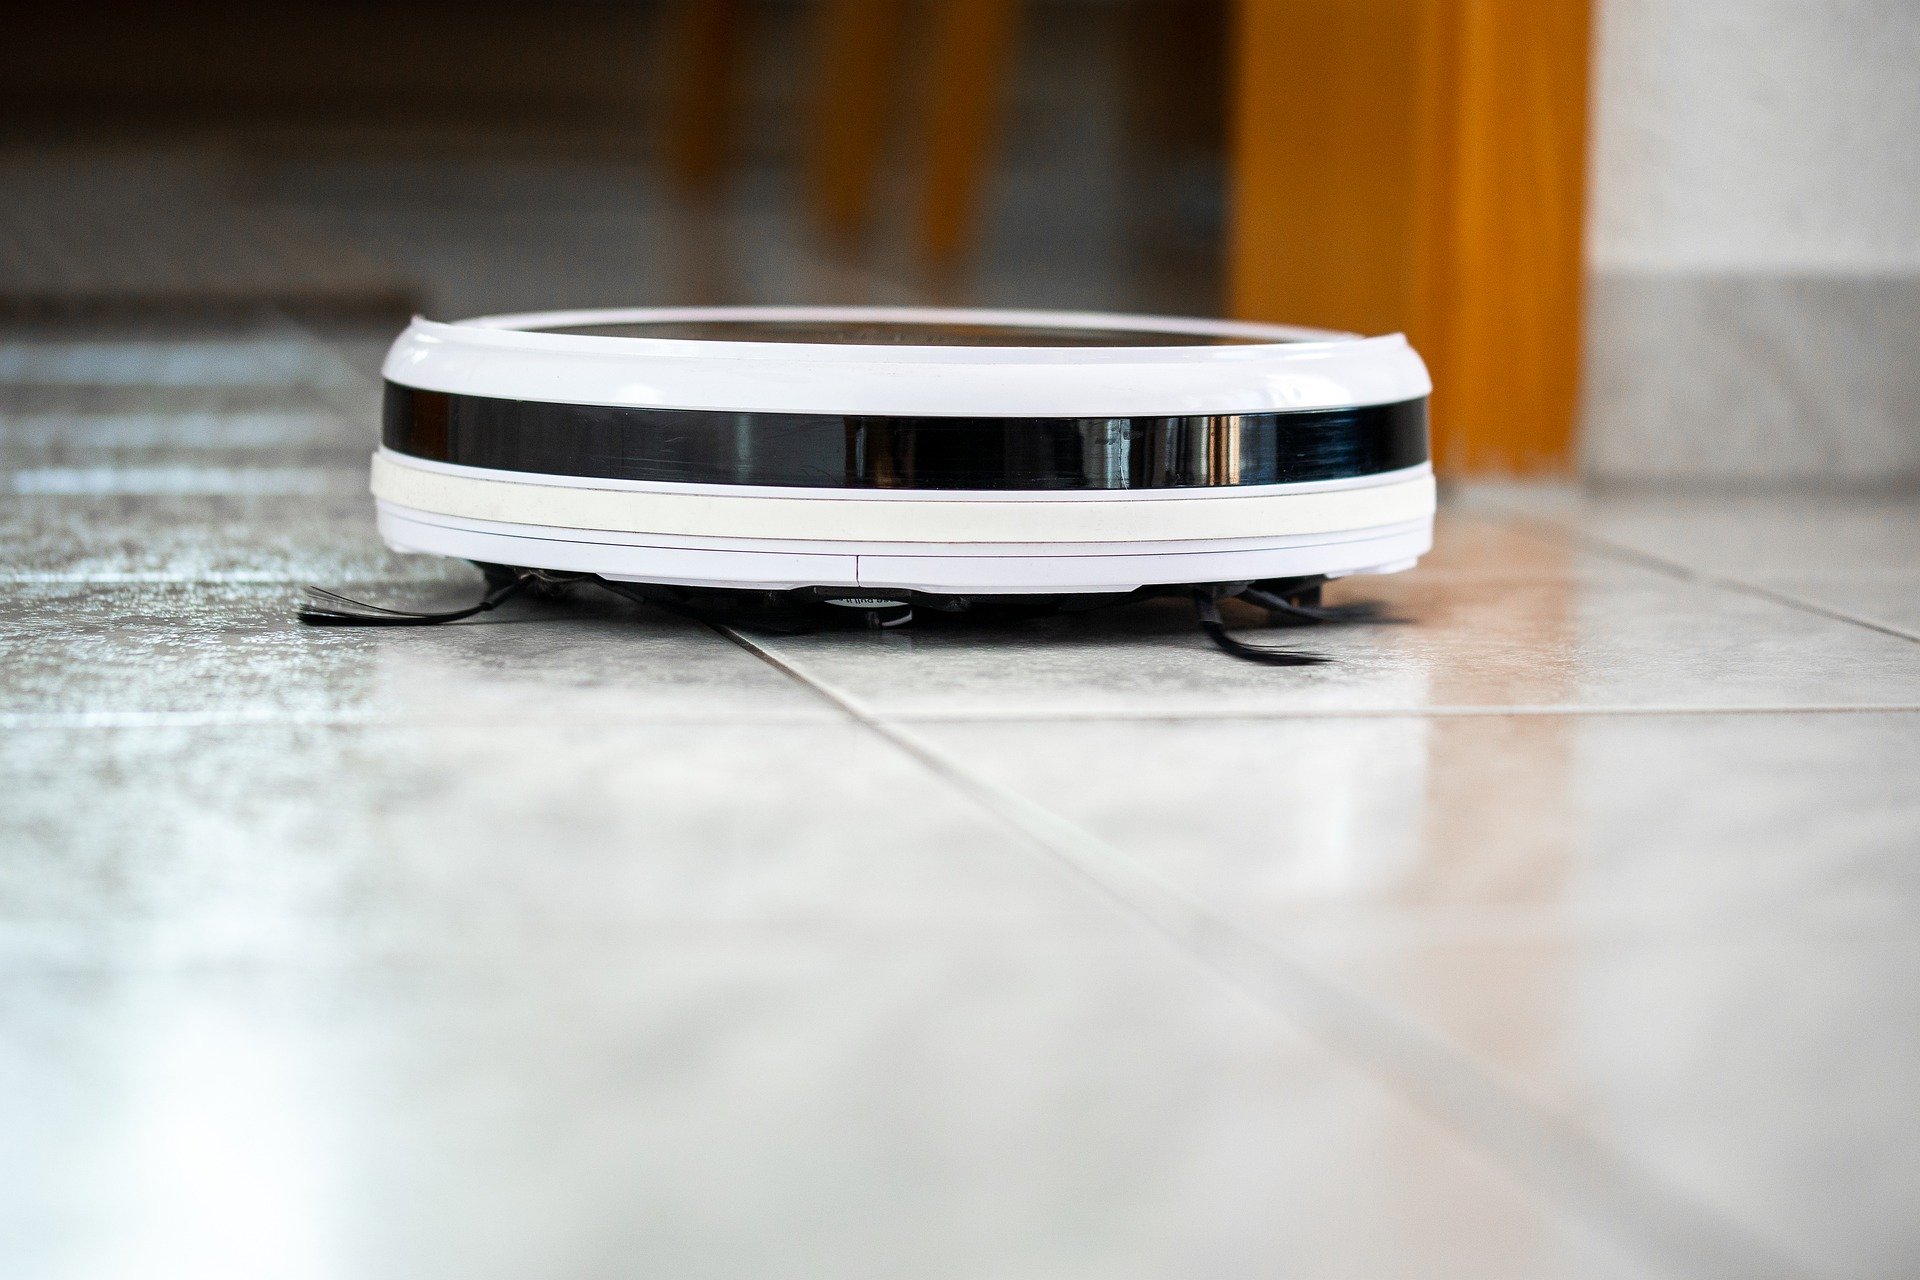 Rating of the best robot vacuum cleaners up to 10,000 rubles for 2022